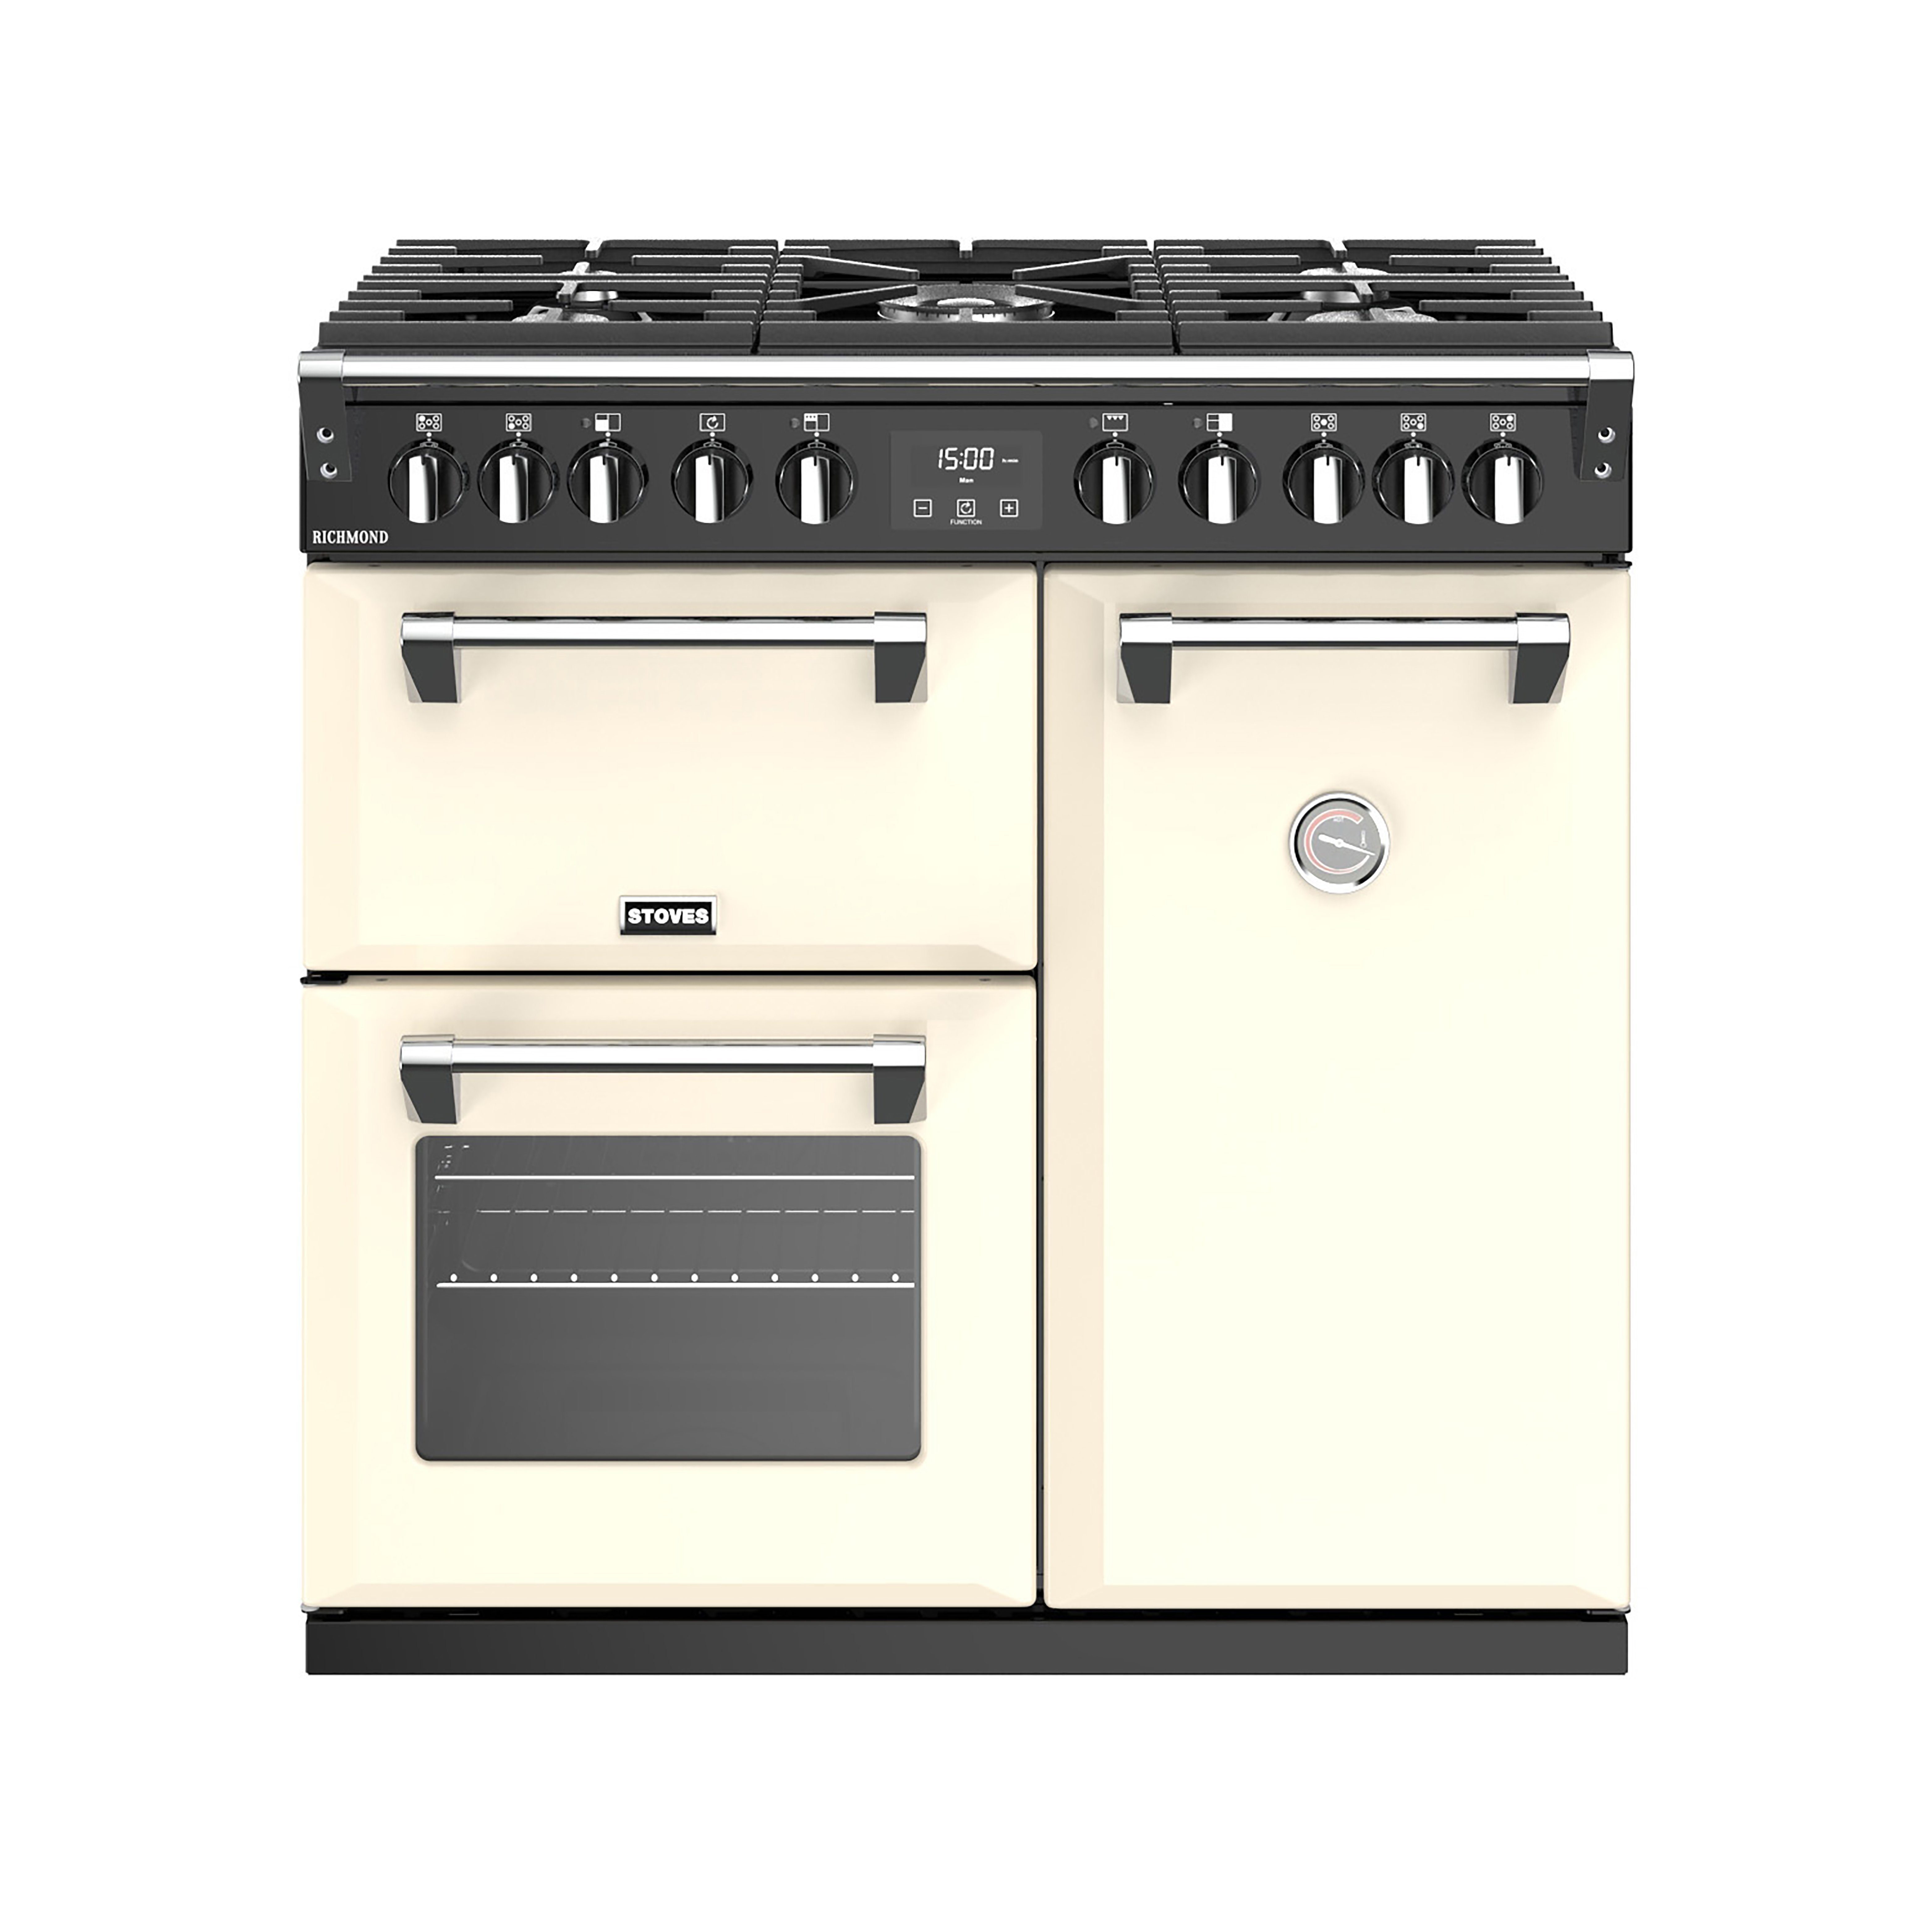 90cm Dual Fuel Range Cooker With A 5 Burner Gas Hob, Conventional Oven & Grill, Multifunction Main Oven And Tall Fanned Oven